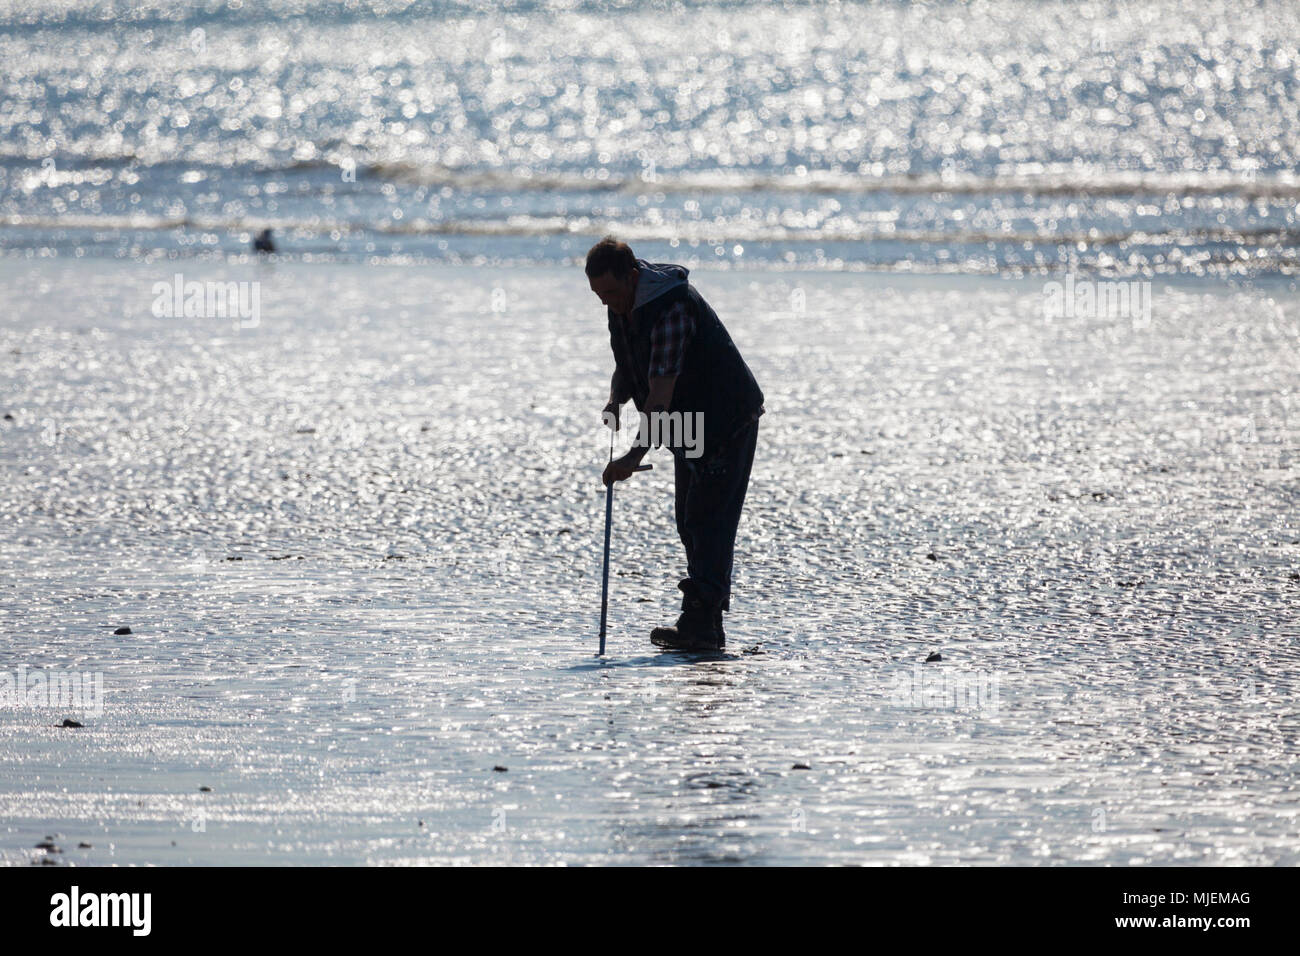 Hastings, East Sussex, UK. 5th May, 2018. UK Weather: Warm start to the morning in Hastings, East Sussex with temperatures in some parts of the country exceeding 20°C. A local fisherman looks for lugworms or sandworms. © Paul Lawrenson 2018, Photo Credit: Paul Lawrenson / Alamy Live News Stock Photo